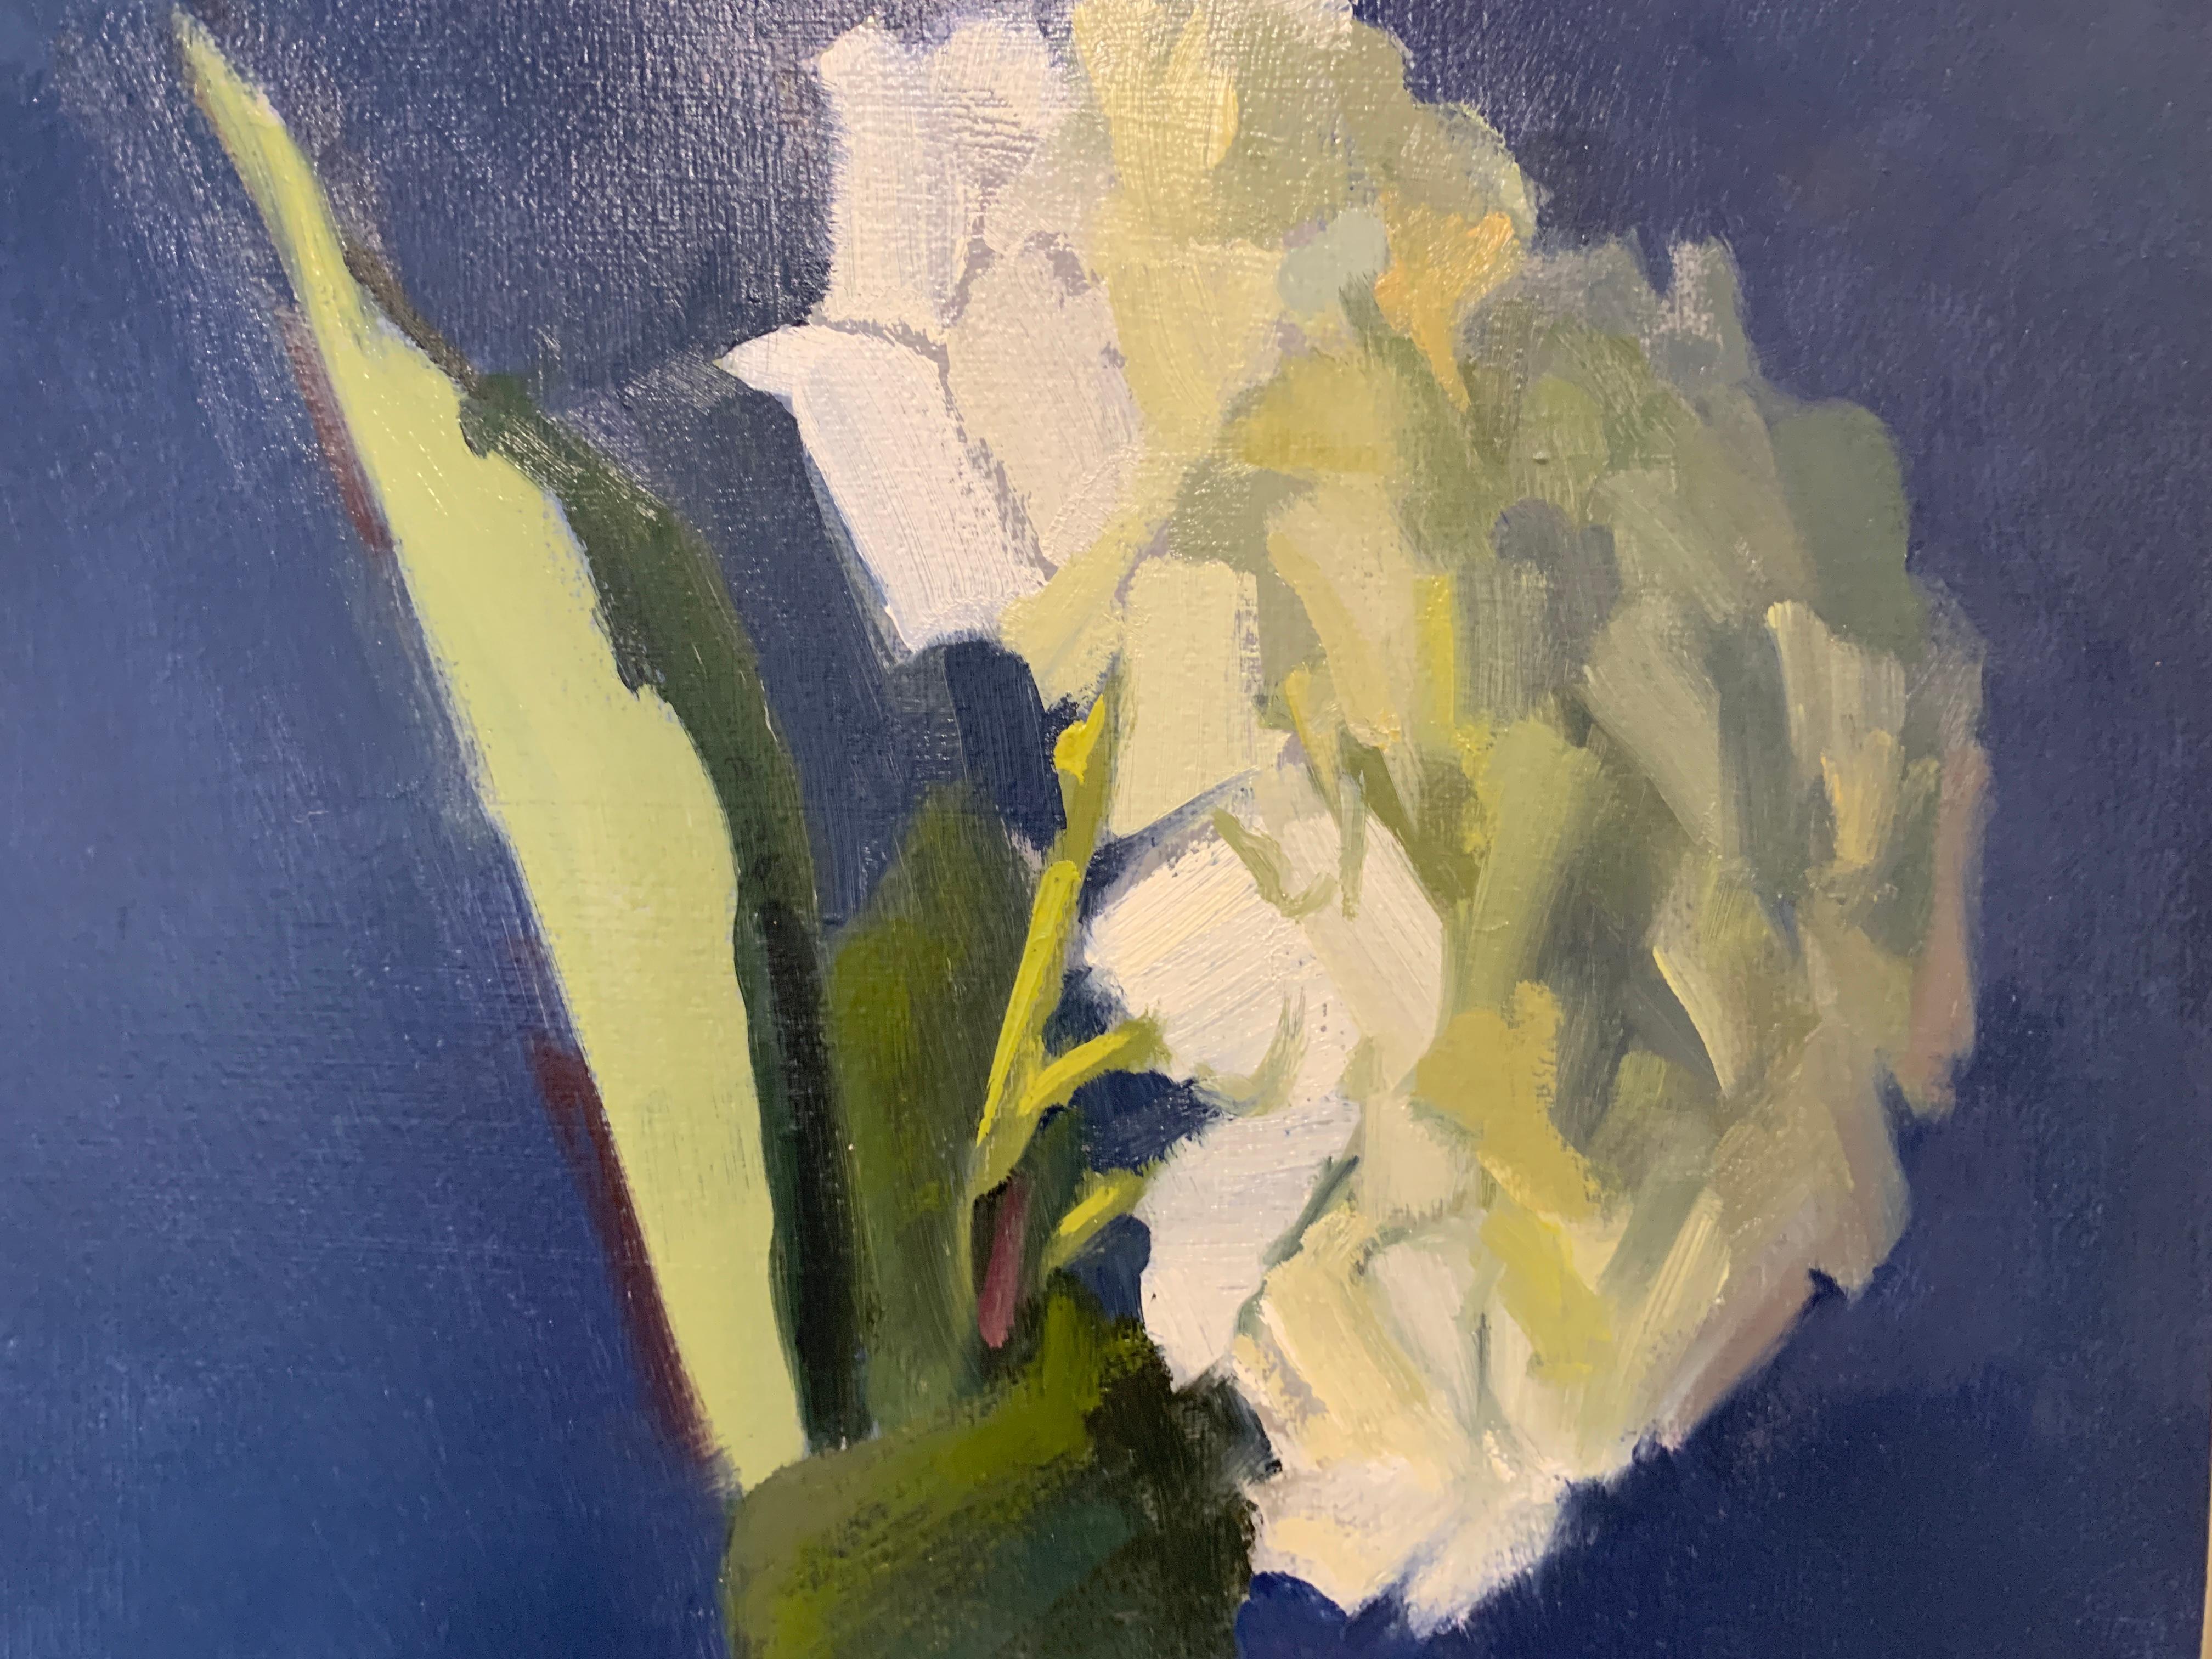 Hydrangea on Tiptoe by Lesley Powell, Small Oil on Board Still-Life Painting 4